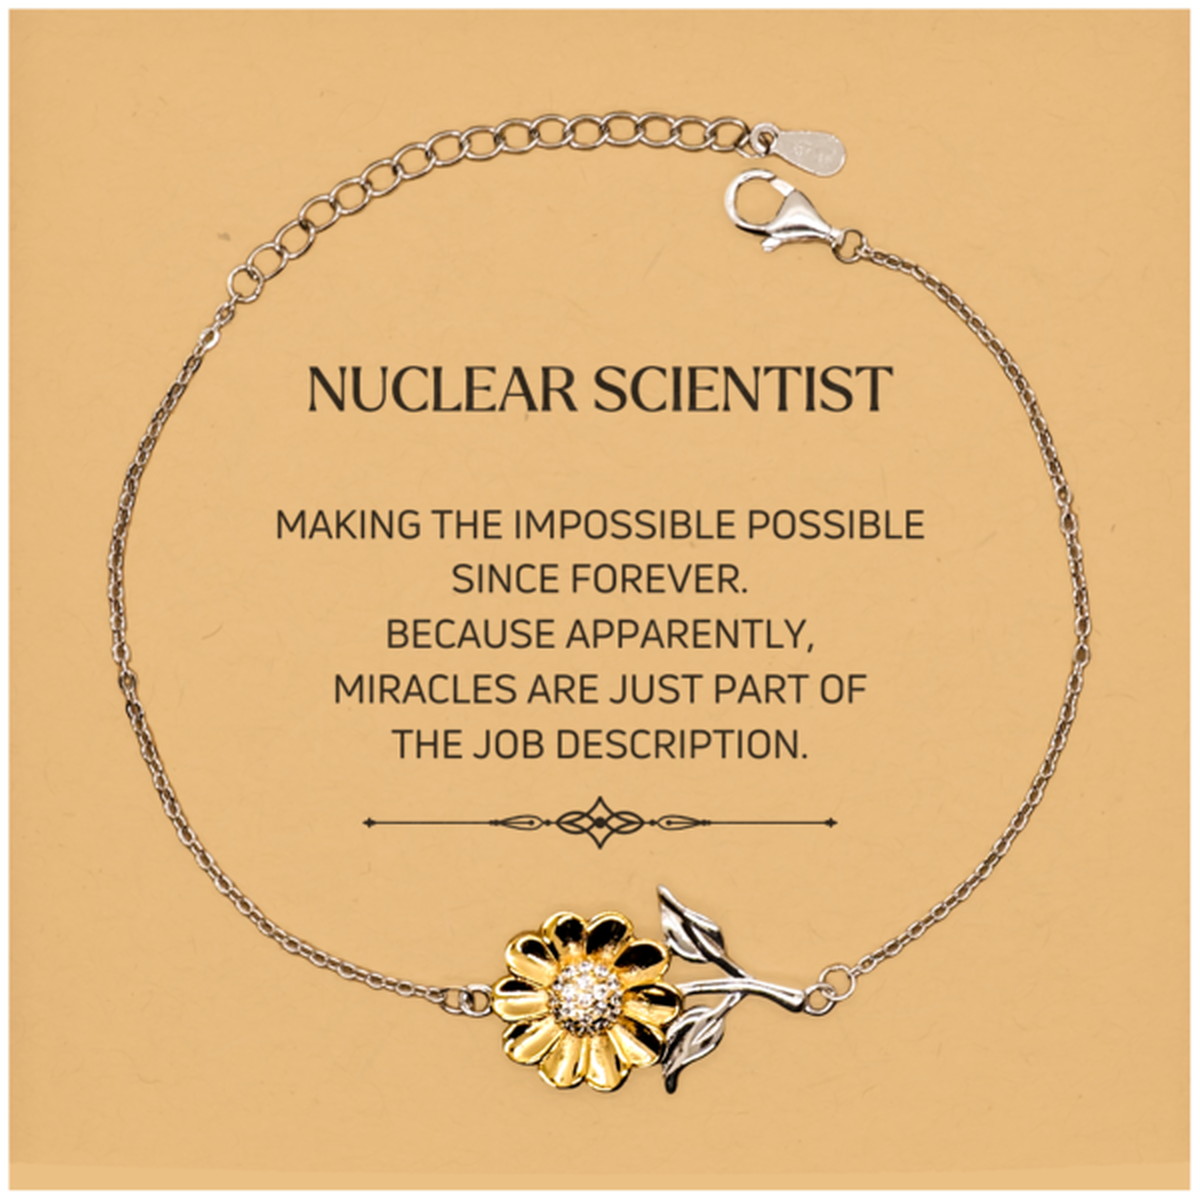 Funny Nuclear Scientist Gifts, Miracles are just part of the job description, Inspirational Birthday Christmas Sunflower Bracelet For Nuclear Scientist, Men, Women, Coworkers, Friends, Boss